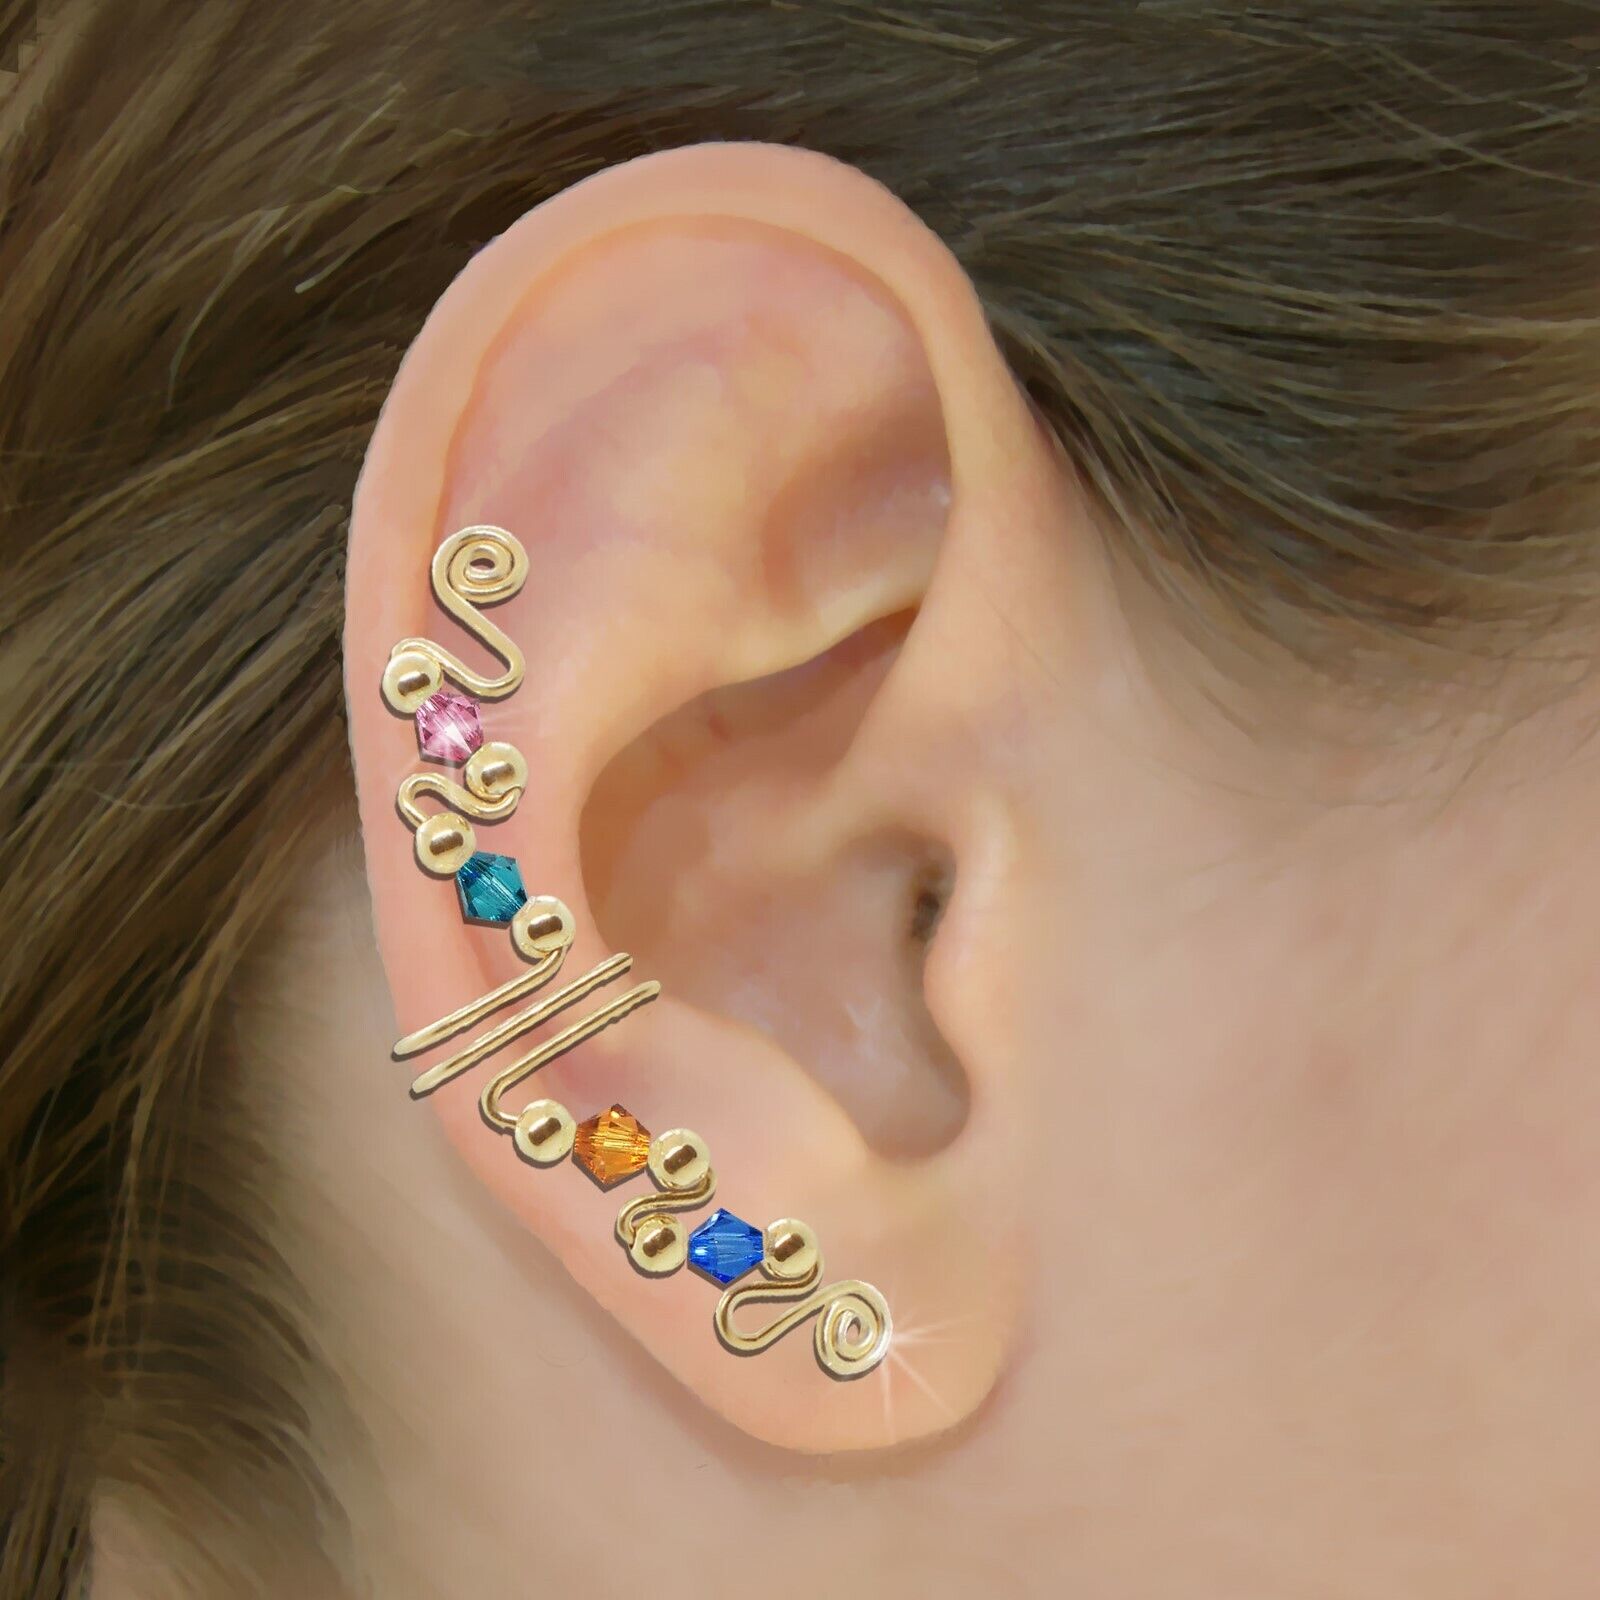 Ear Wraps Customized Cuffs Climbers Crawlers Earring Gold or Silver w/ Crystals